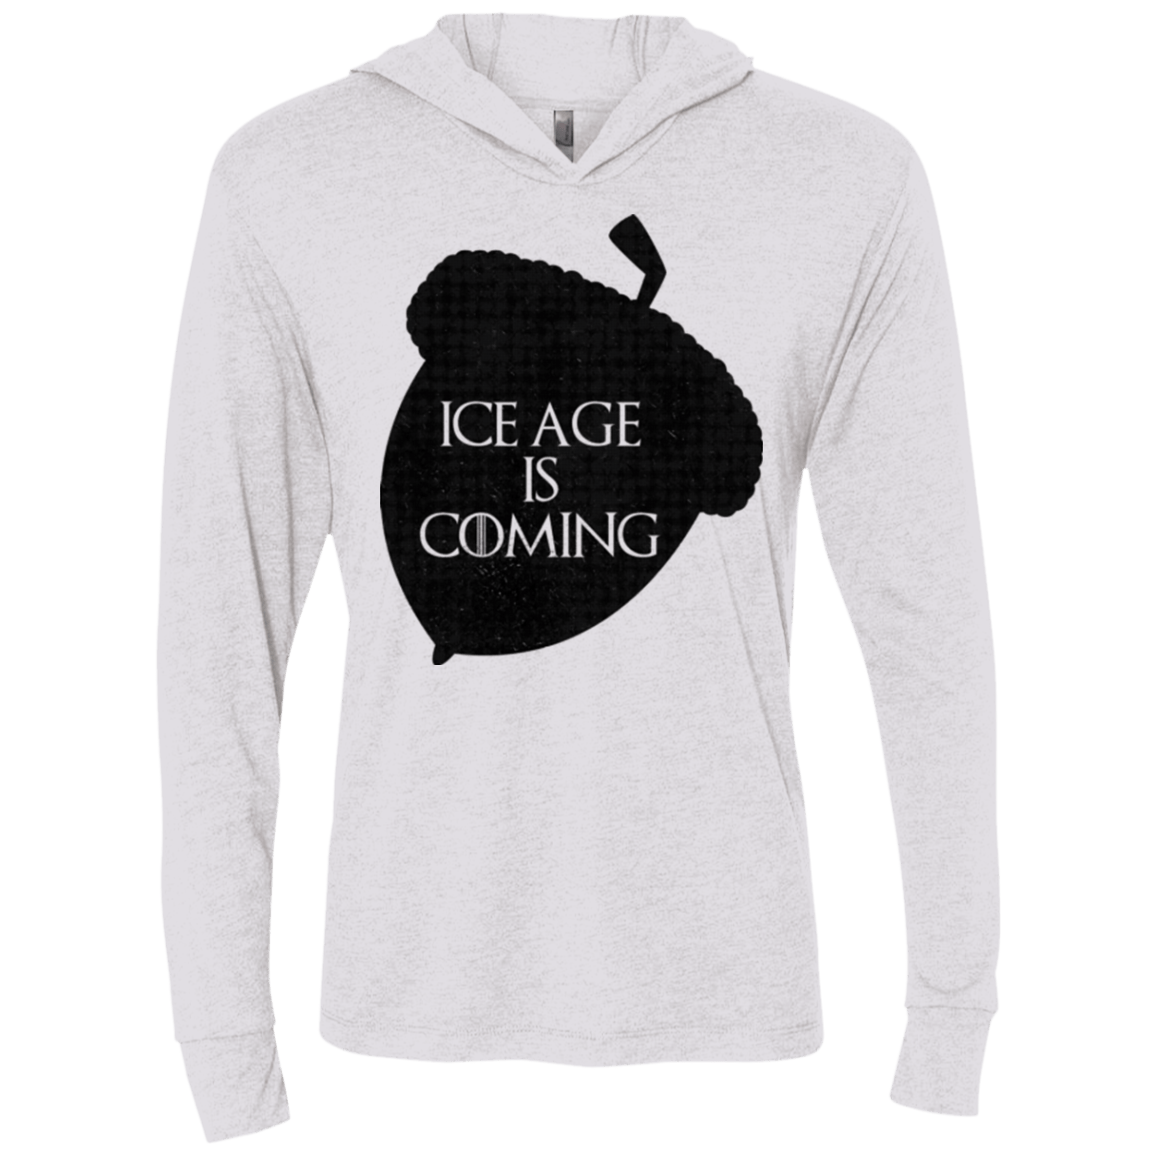 T-Shirts Heather White / X-Small Ice coming Triblend Long Sleeve Hoodie Tee